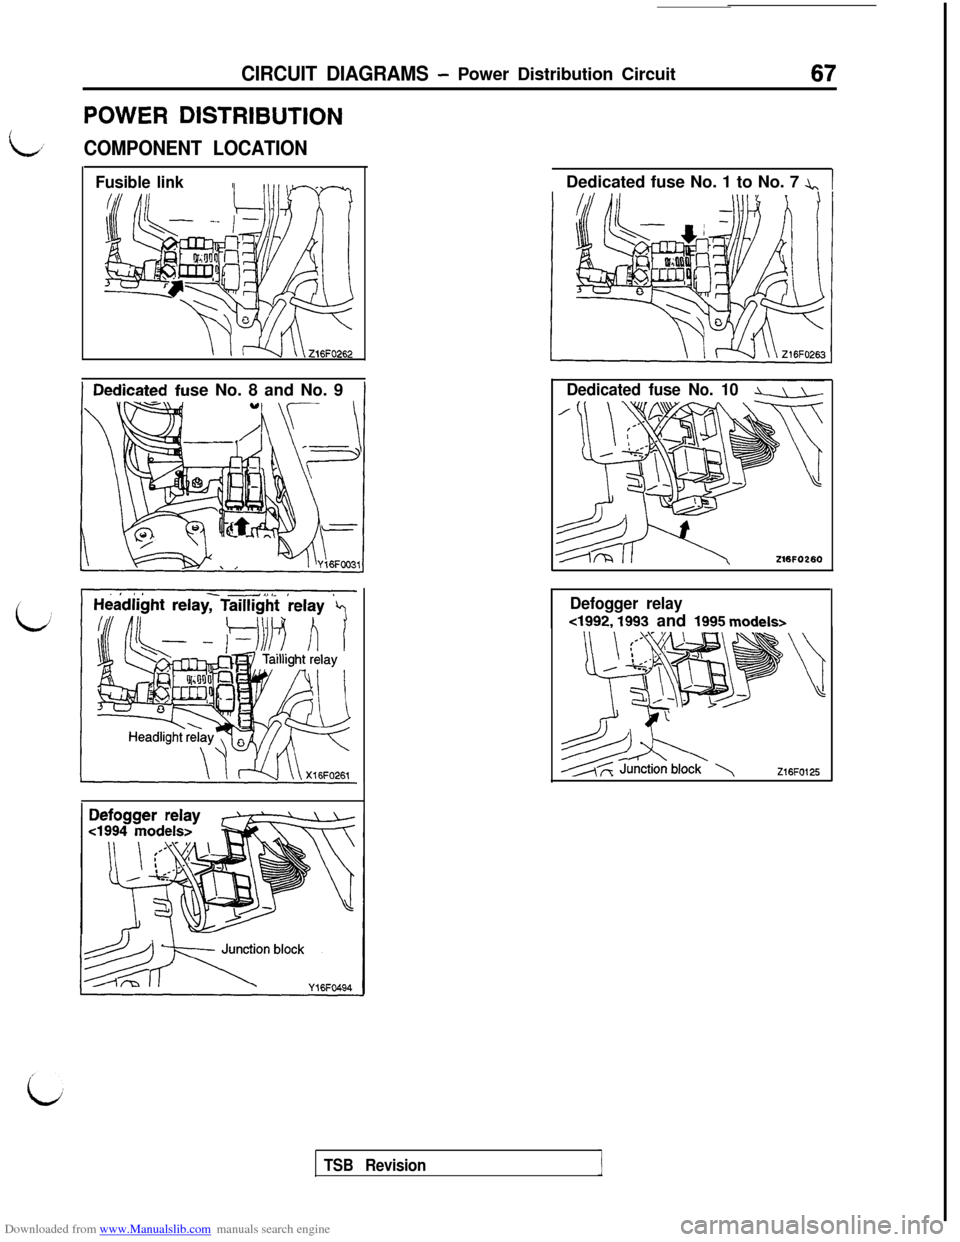 MITSUBISHI 3000GT 1992 2.G Repair Manual Downloaded from www.Manualslib.com manuals search engine CIRCUIT DIAGRAMS - Power Distribution Circuit67
POWER DISTRIBUTION
L,’COMPONENT LOCATION
Fusible linkse No. 8 and No. 9Dedicated fuse No. 1 t